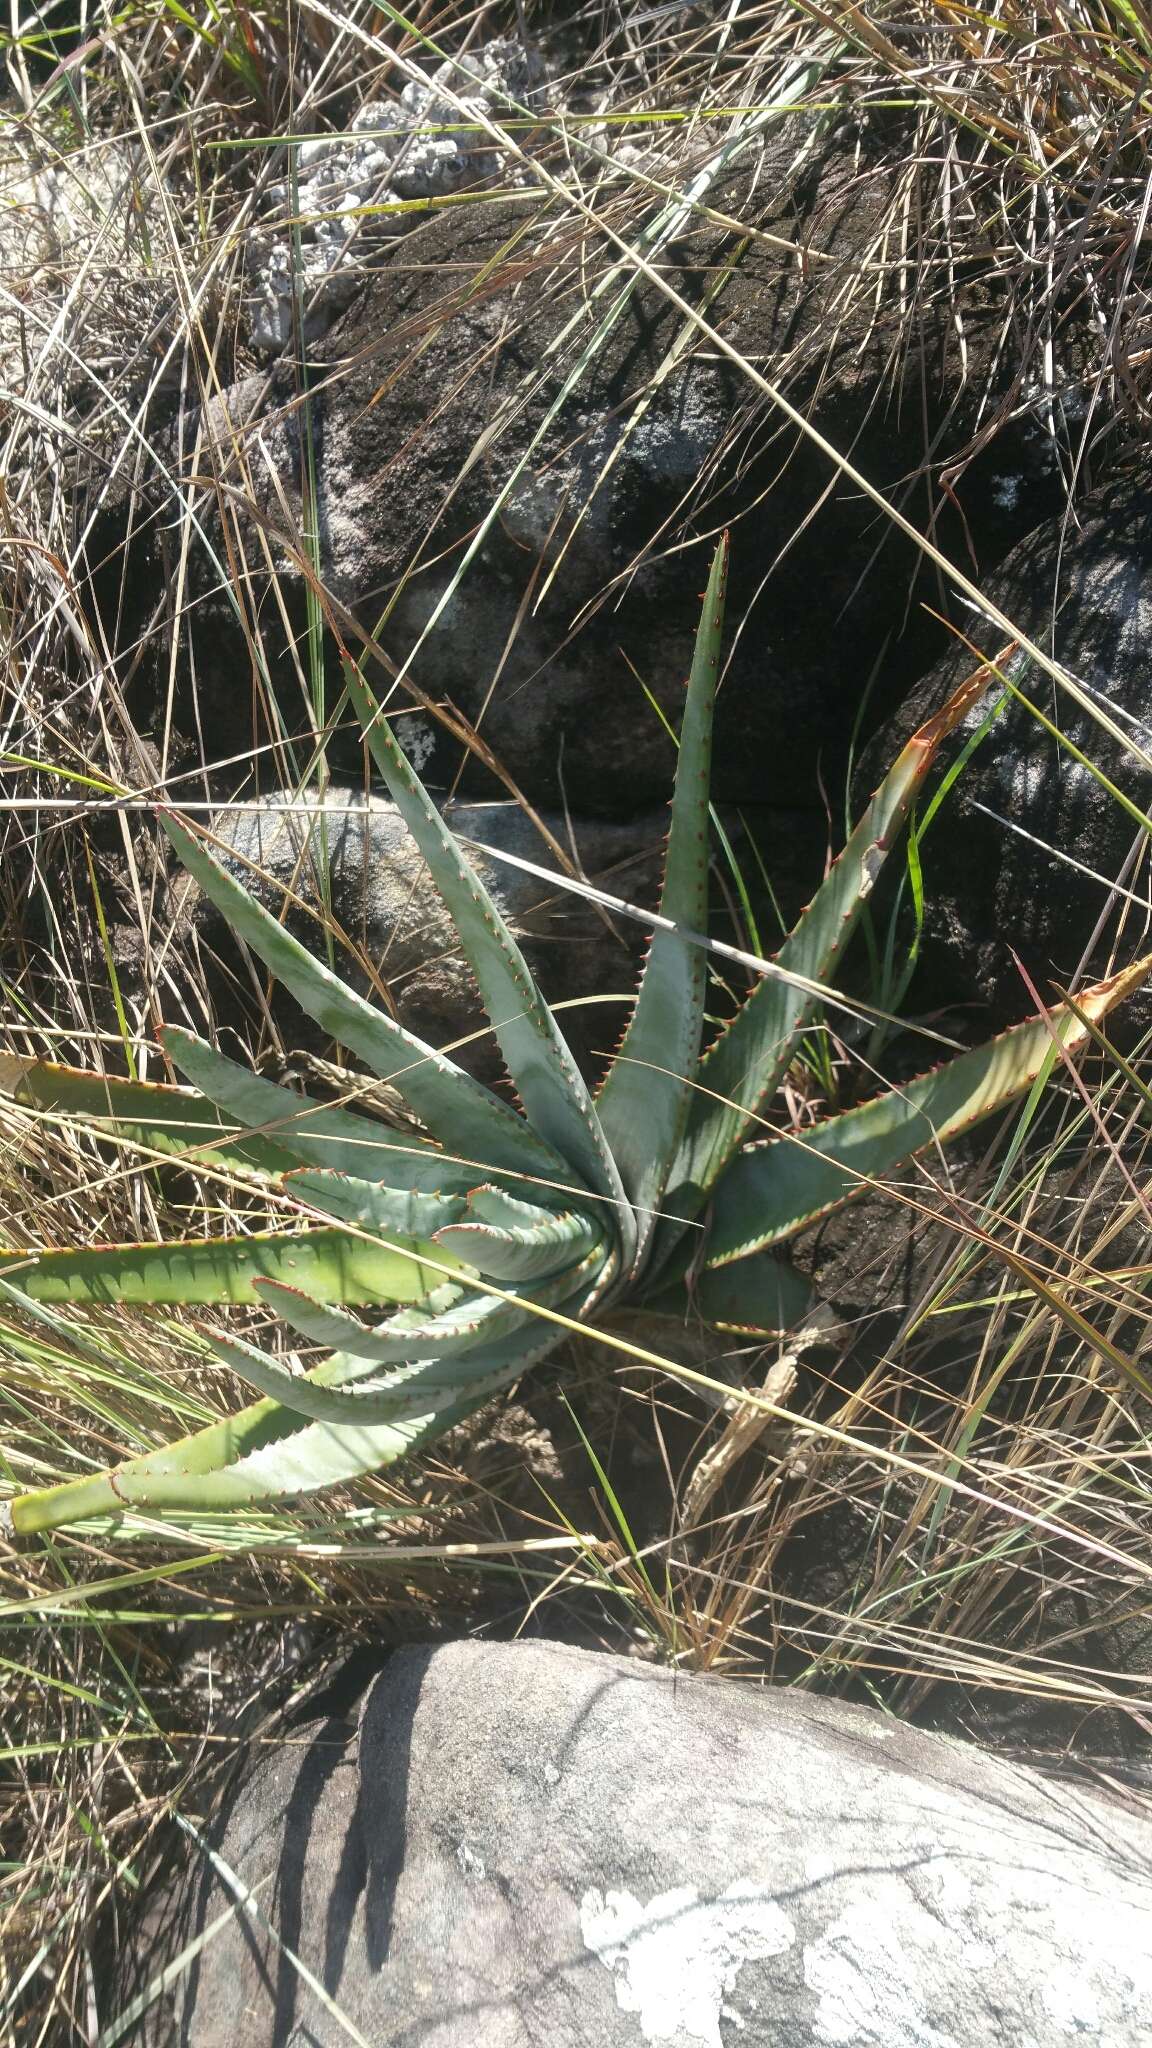 Image of Aloe trachyticola (H. Perrier) Reynolds